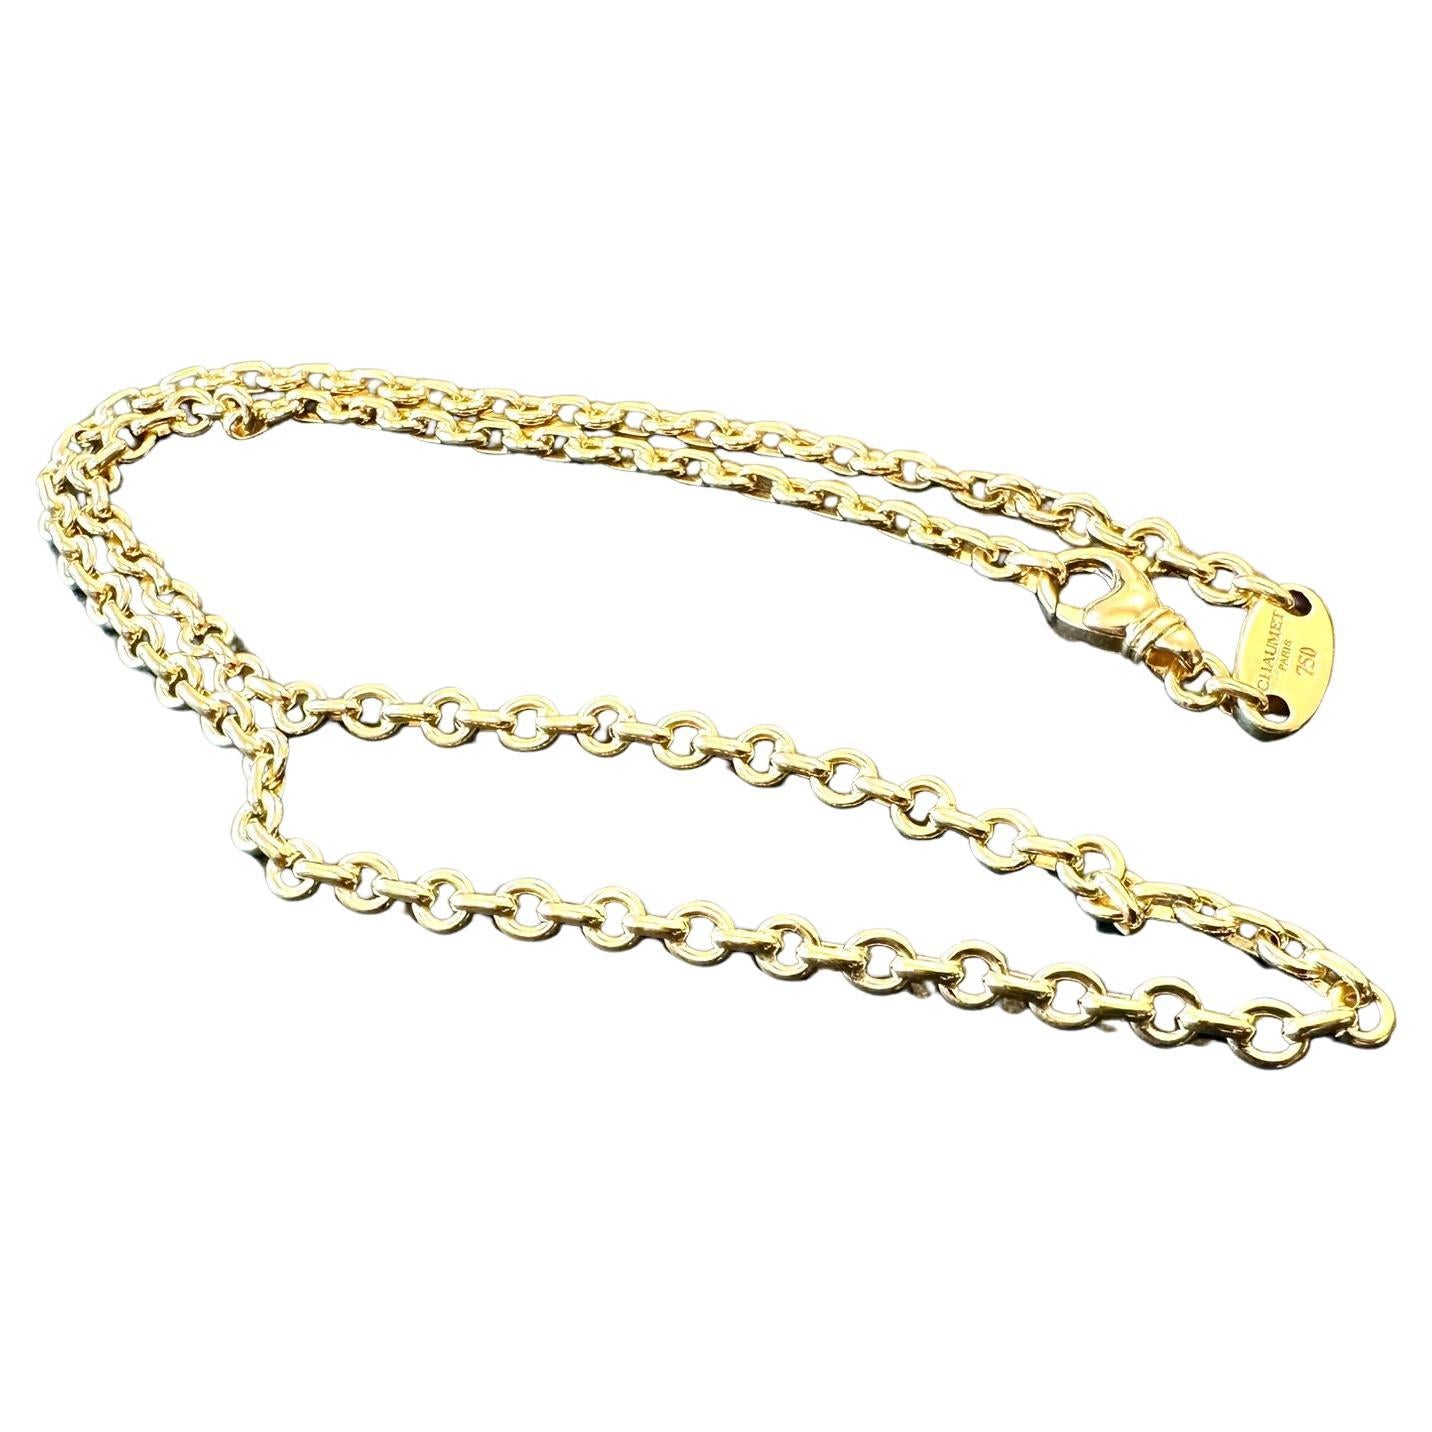 The Chaumet 18 karat Yellow Gold Chain is an exquisite and timeless accessory, showcasing the brand's commitment to luxury and craftsmanship. Crafted from high-quality 18 karat yellow gold, this chain exudes a warm and lustrous glow.

The design is